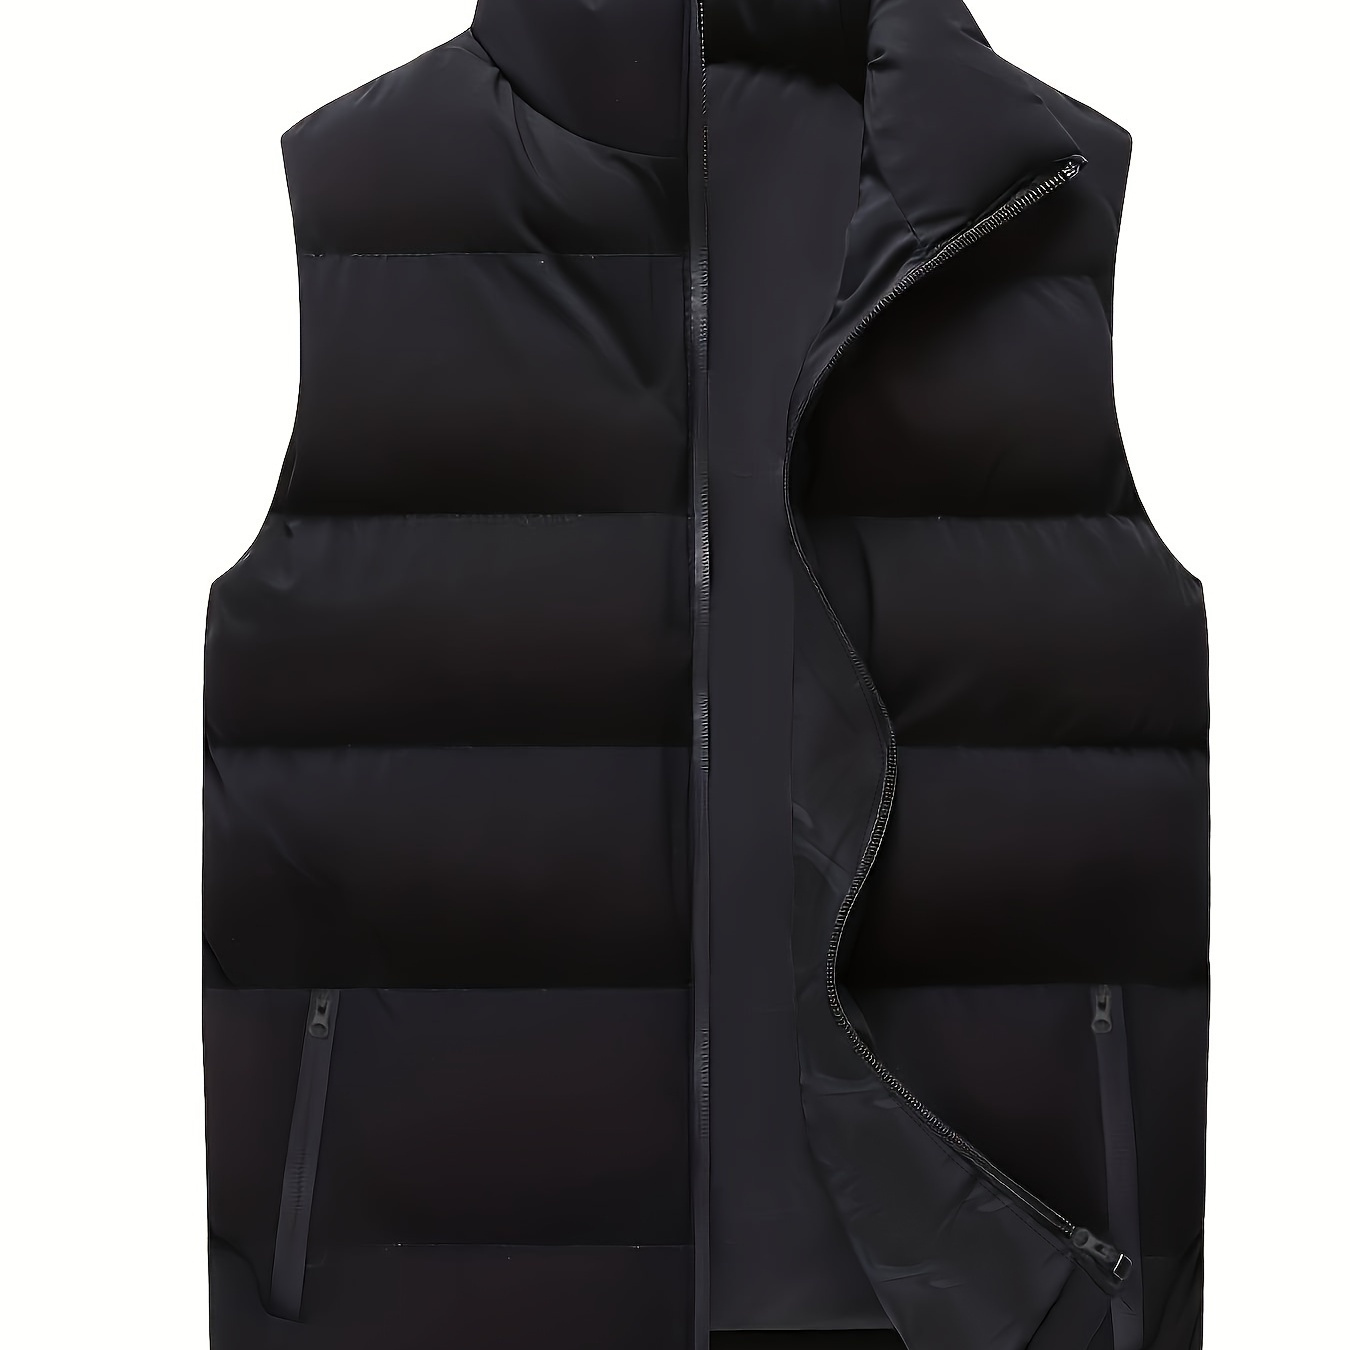 

Plus Size Men's Solid Puffer Vest Jacket, Fashion Casual Thick Sleeveless Fall Winter Tops, Men's Clothing